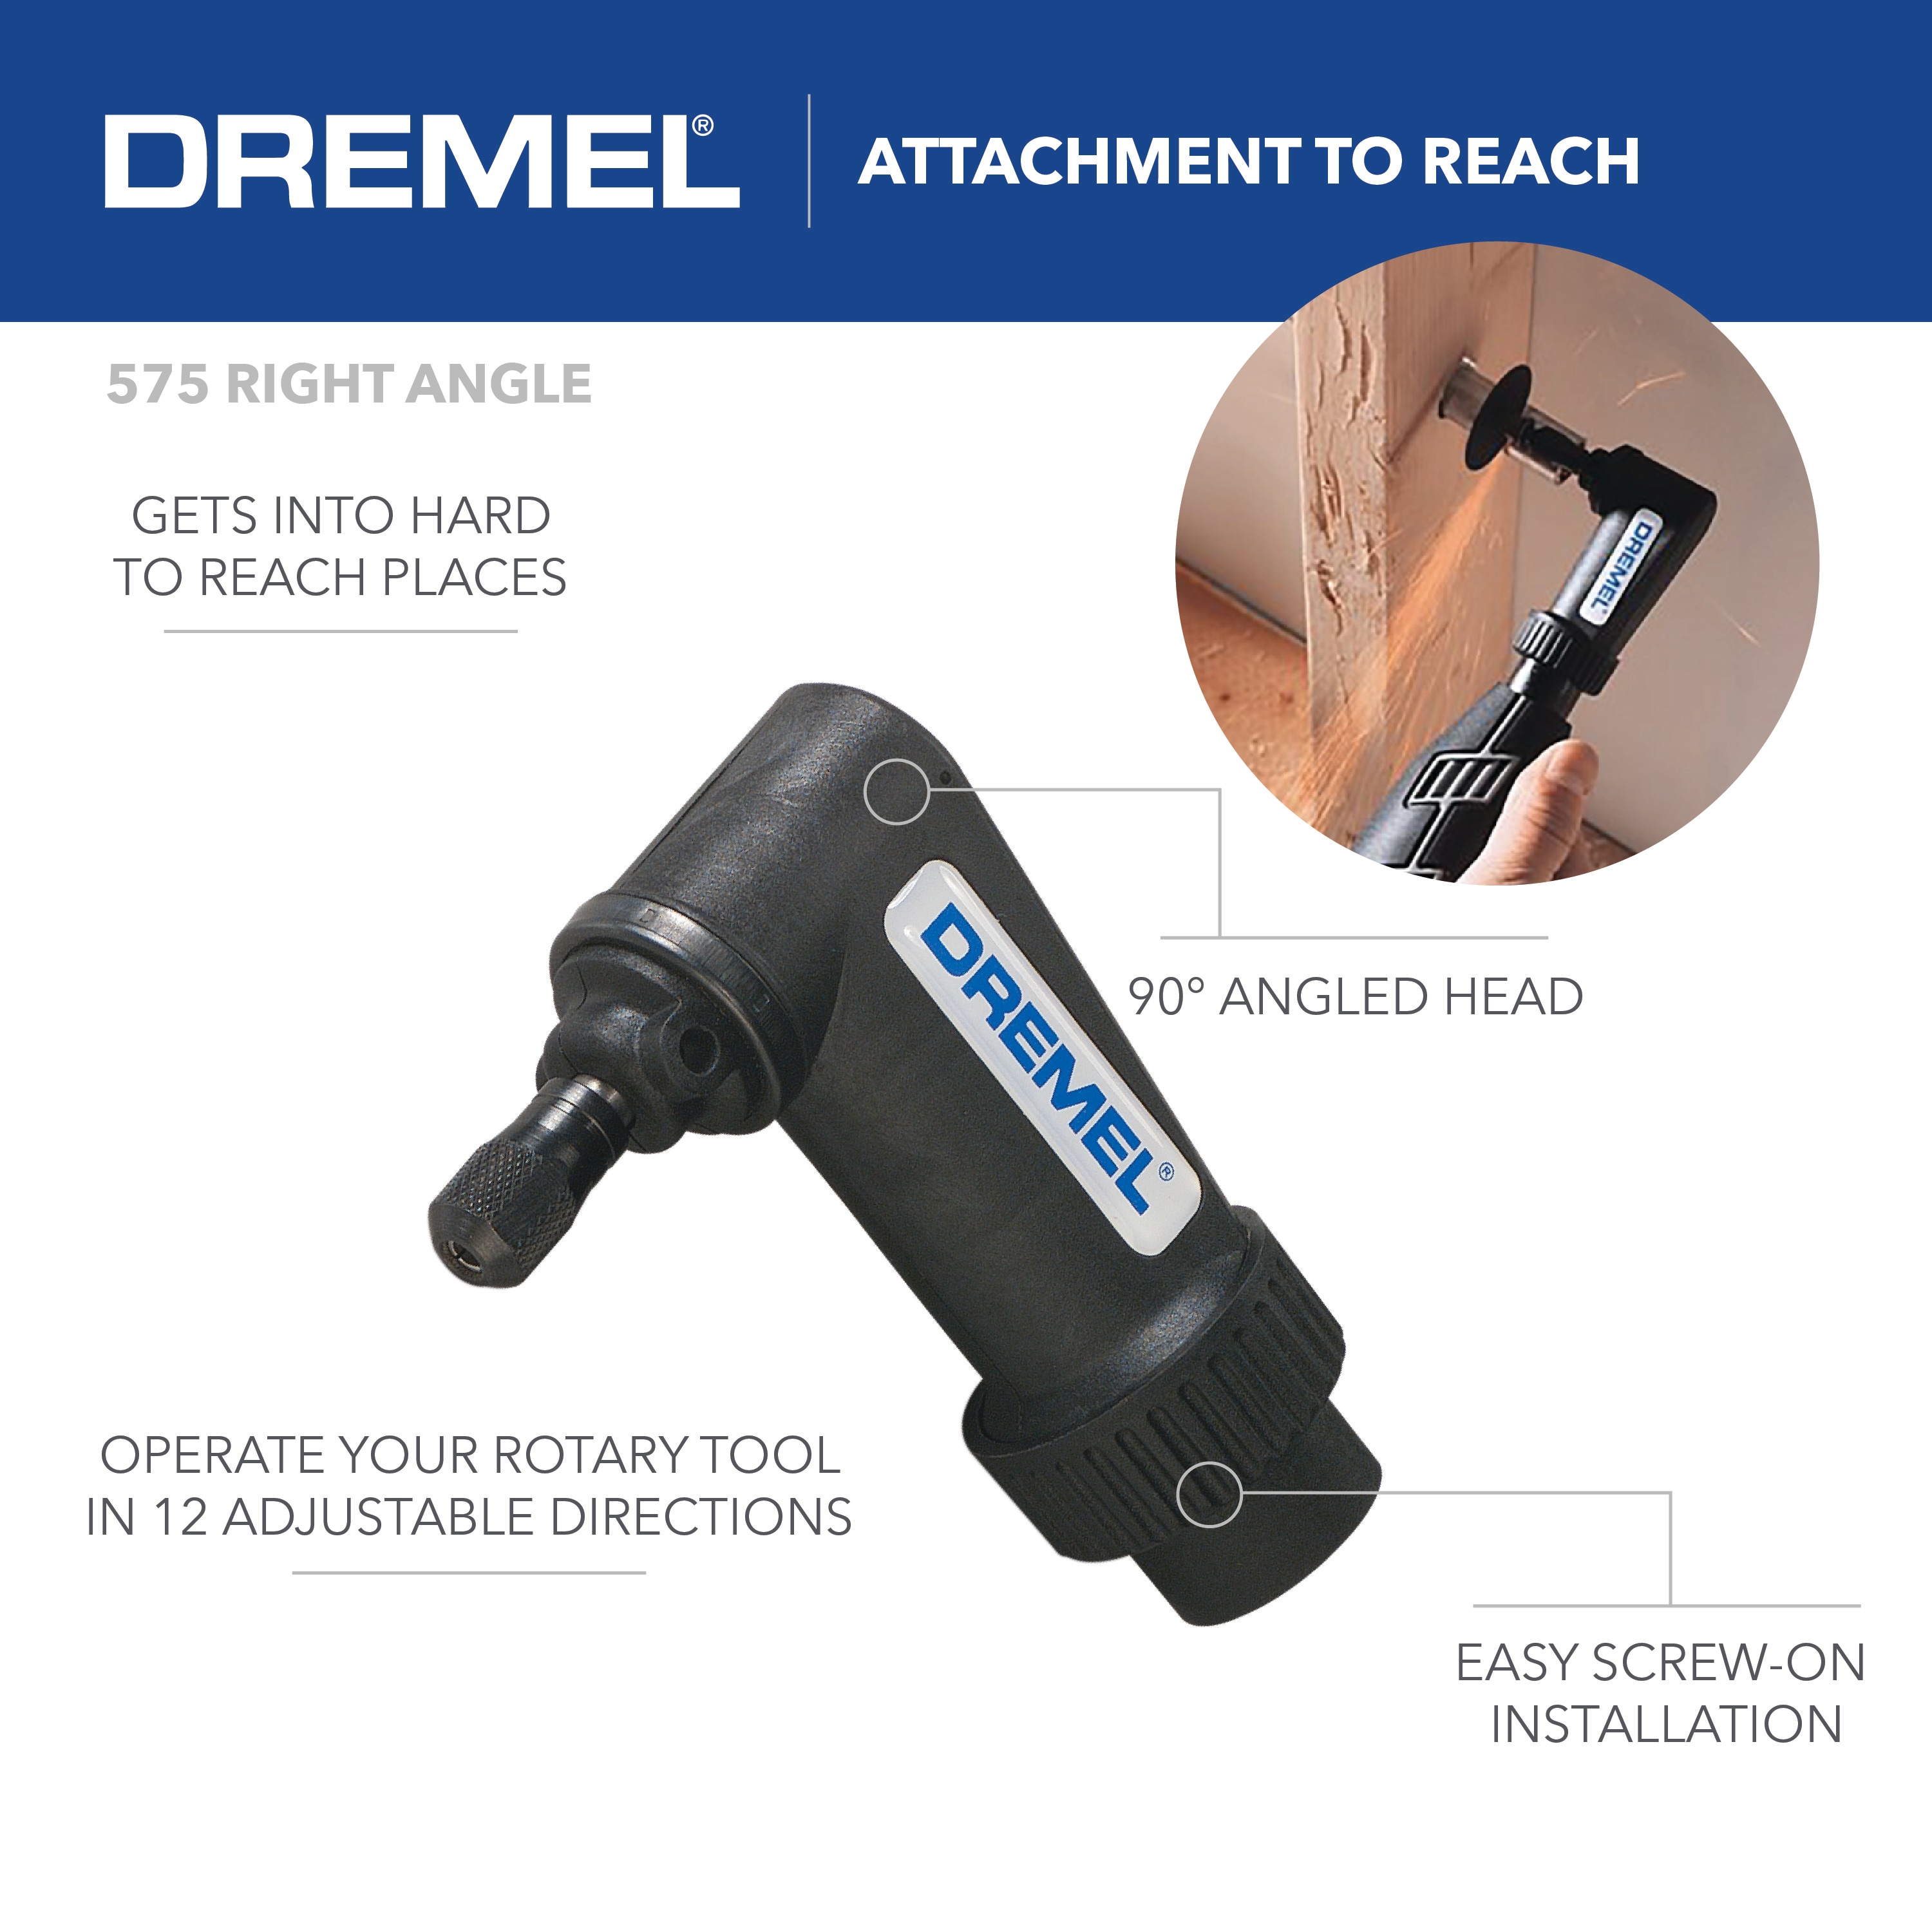 powertools - How remove front bearing in dremel 398 rotary tool? - Home  Improvement Stack Exchange